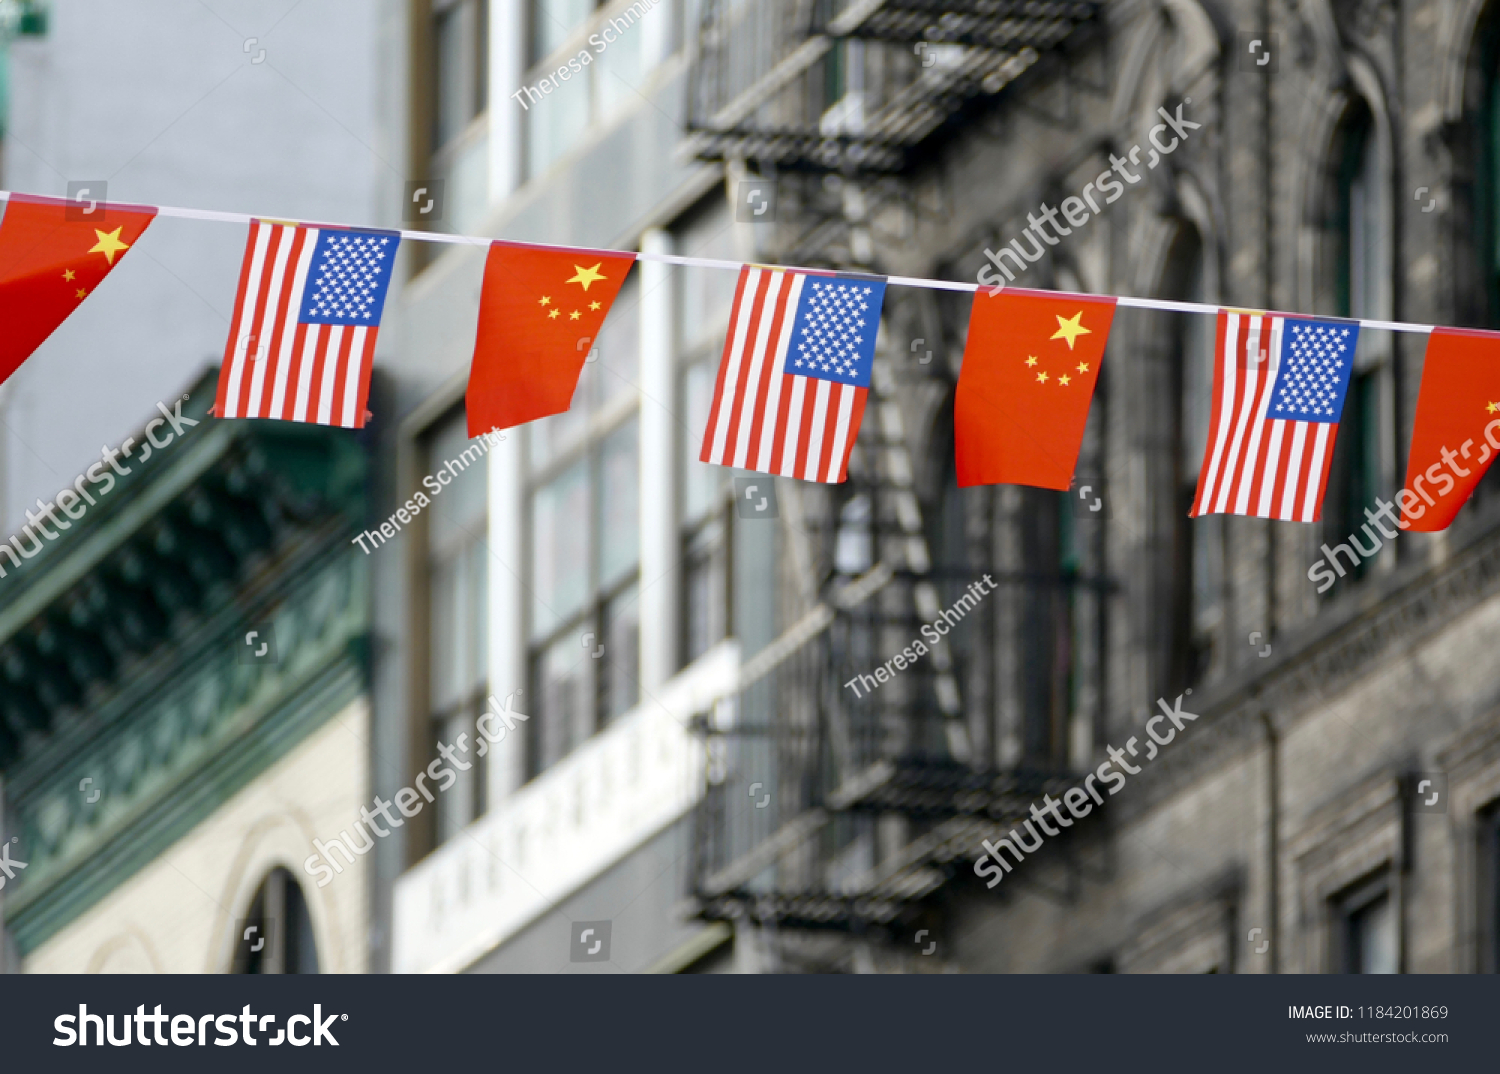 Flags of USA and China Hanging Next to Each Other in Chinatown, New York, USA #1184201869